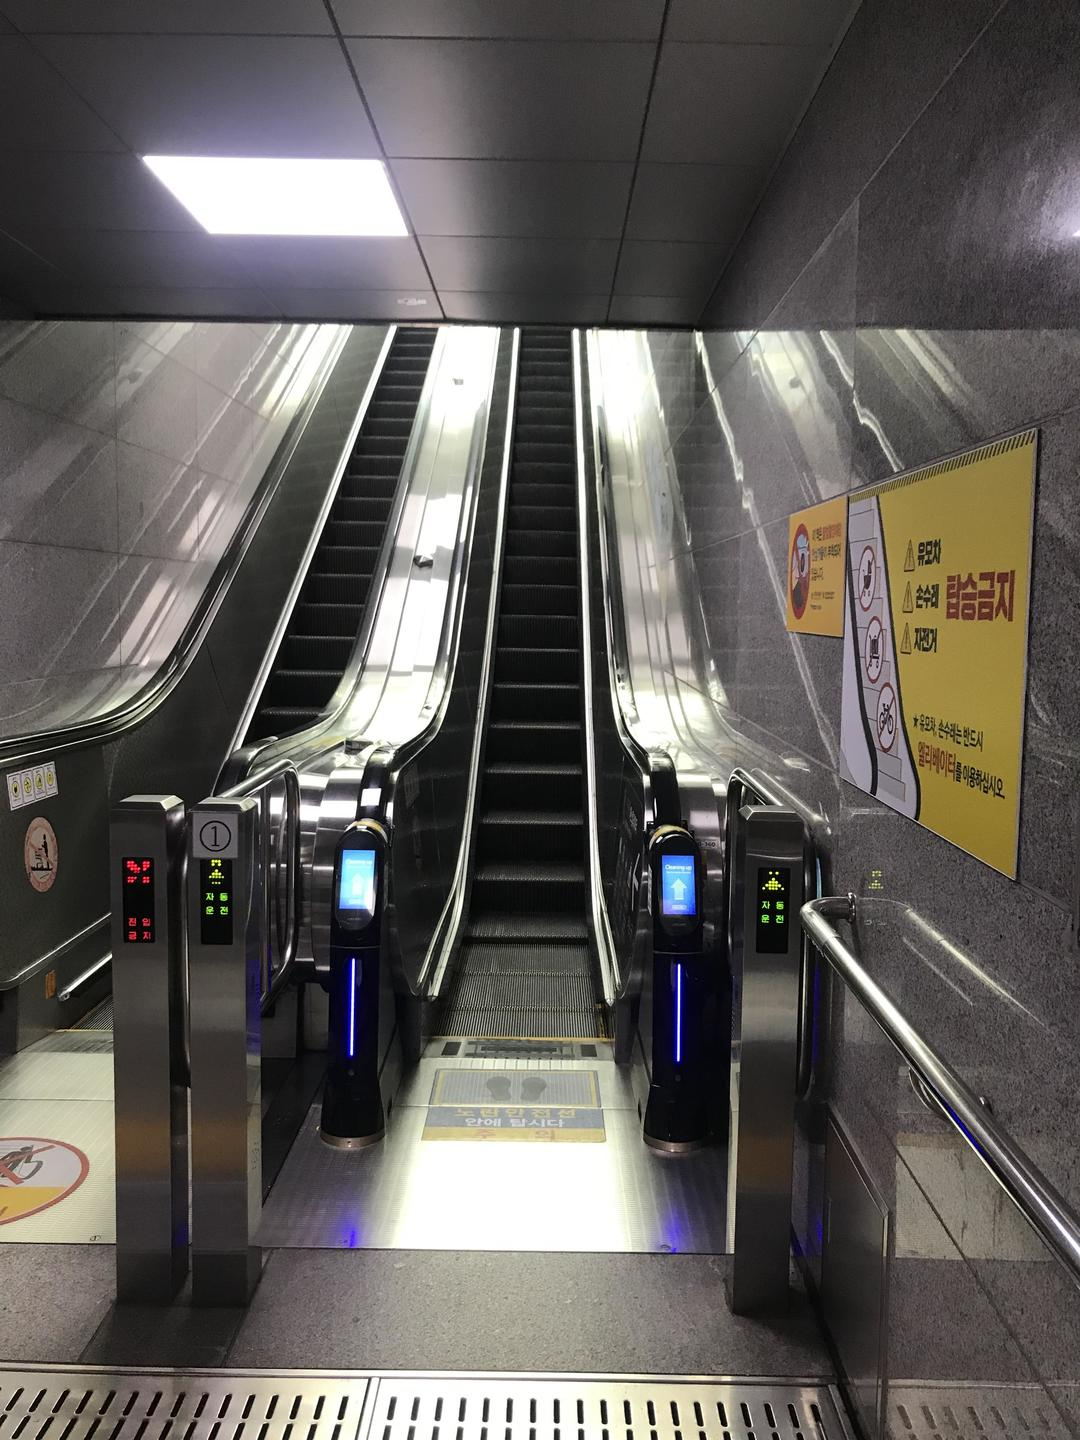 In 2022, introduce Weclean, an automatic sterilization and vacuum cleaner for escalator handles, at Sangin Station, a pilot station to respond to COVID-19 in Daegu subway 3